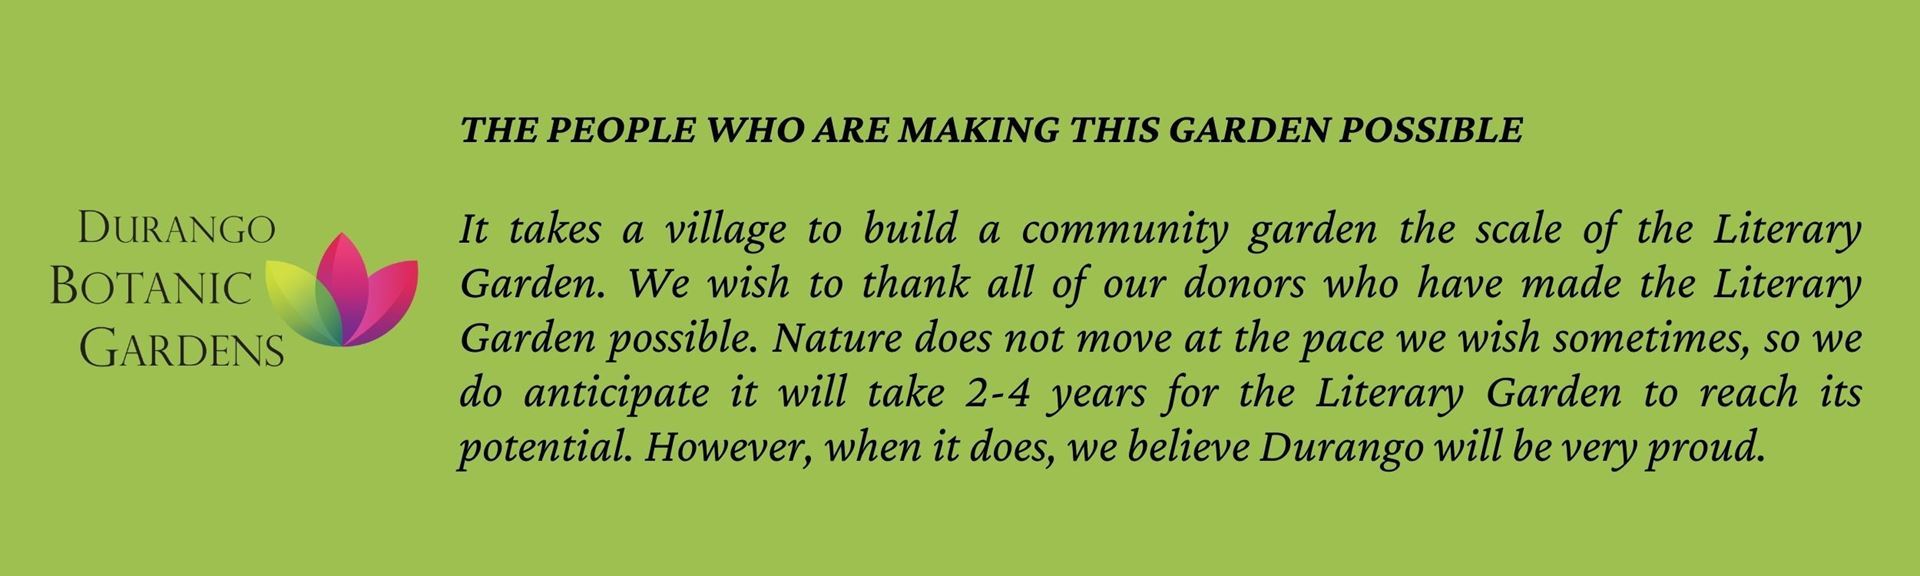 Thanks to our donors for making this garden possible. 